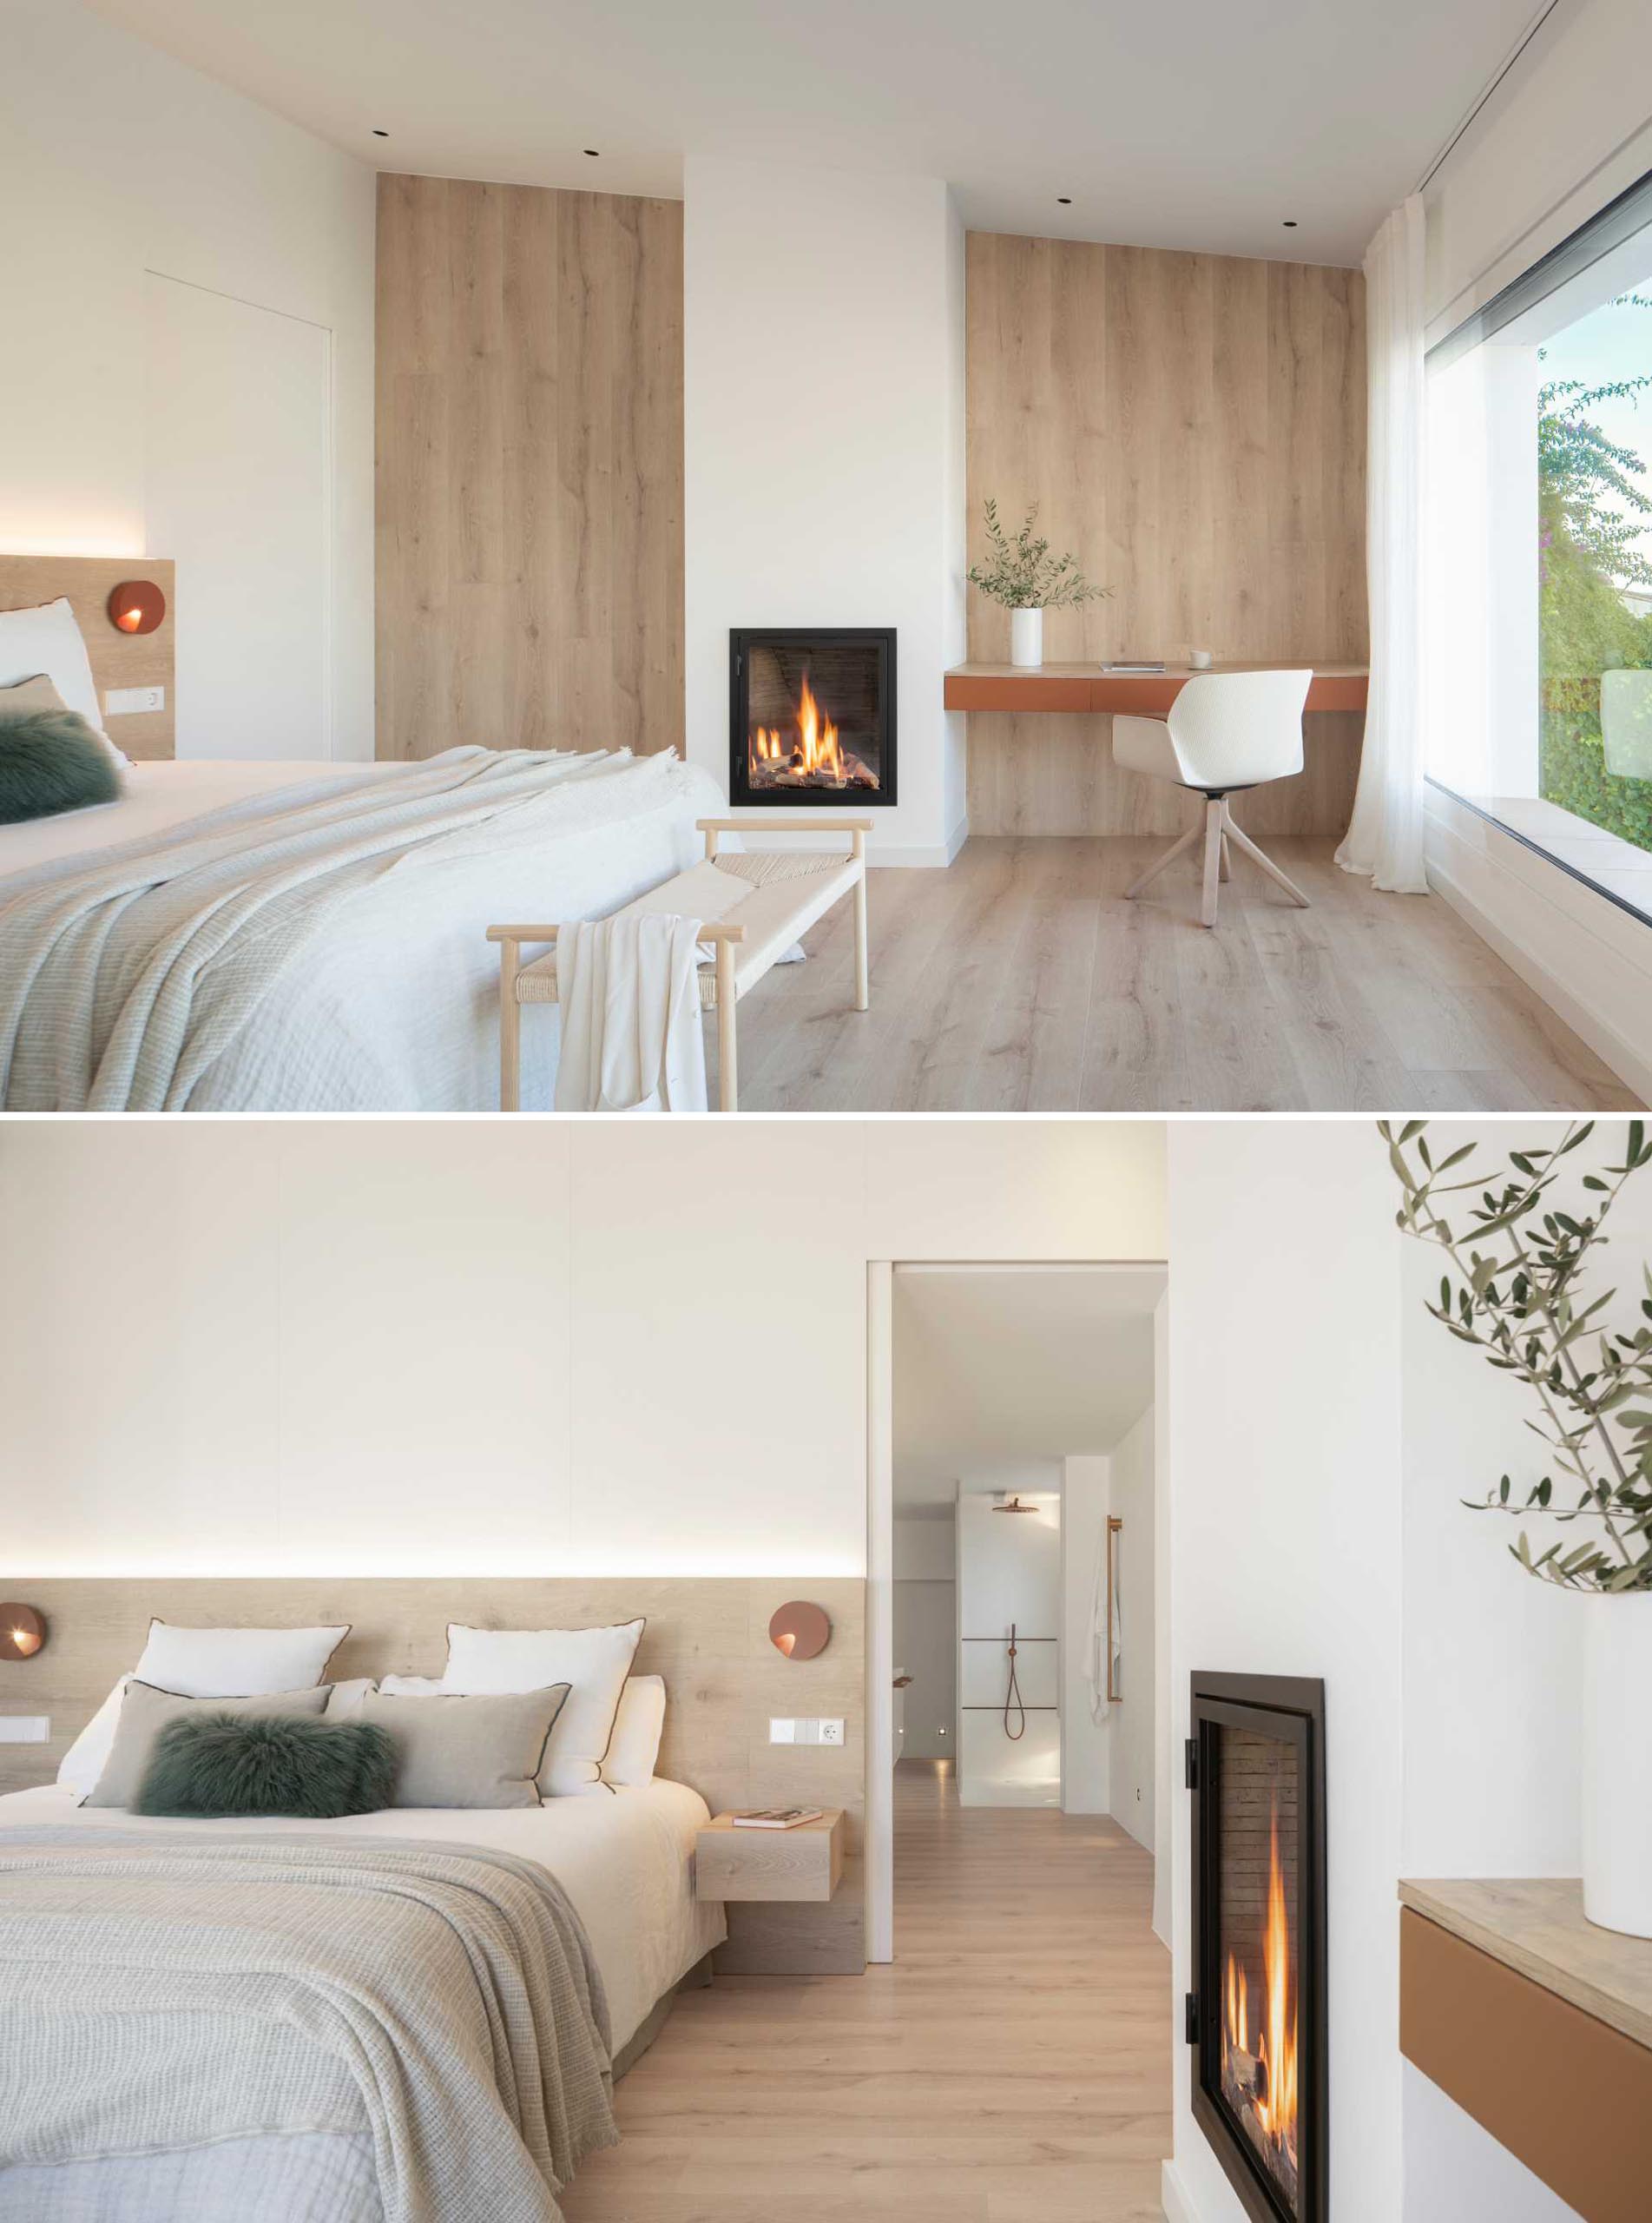 A modern bedroom with oak floors that wrap up onto the wall on either side of the fireplace.